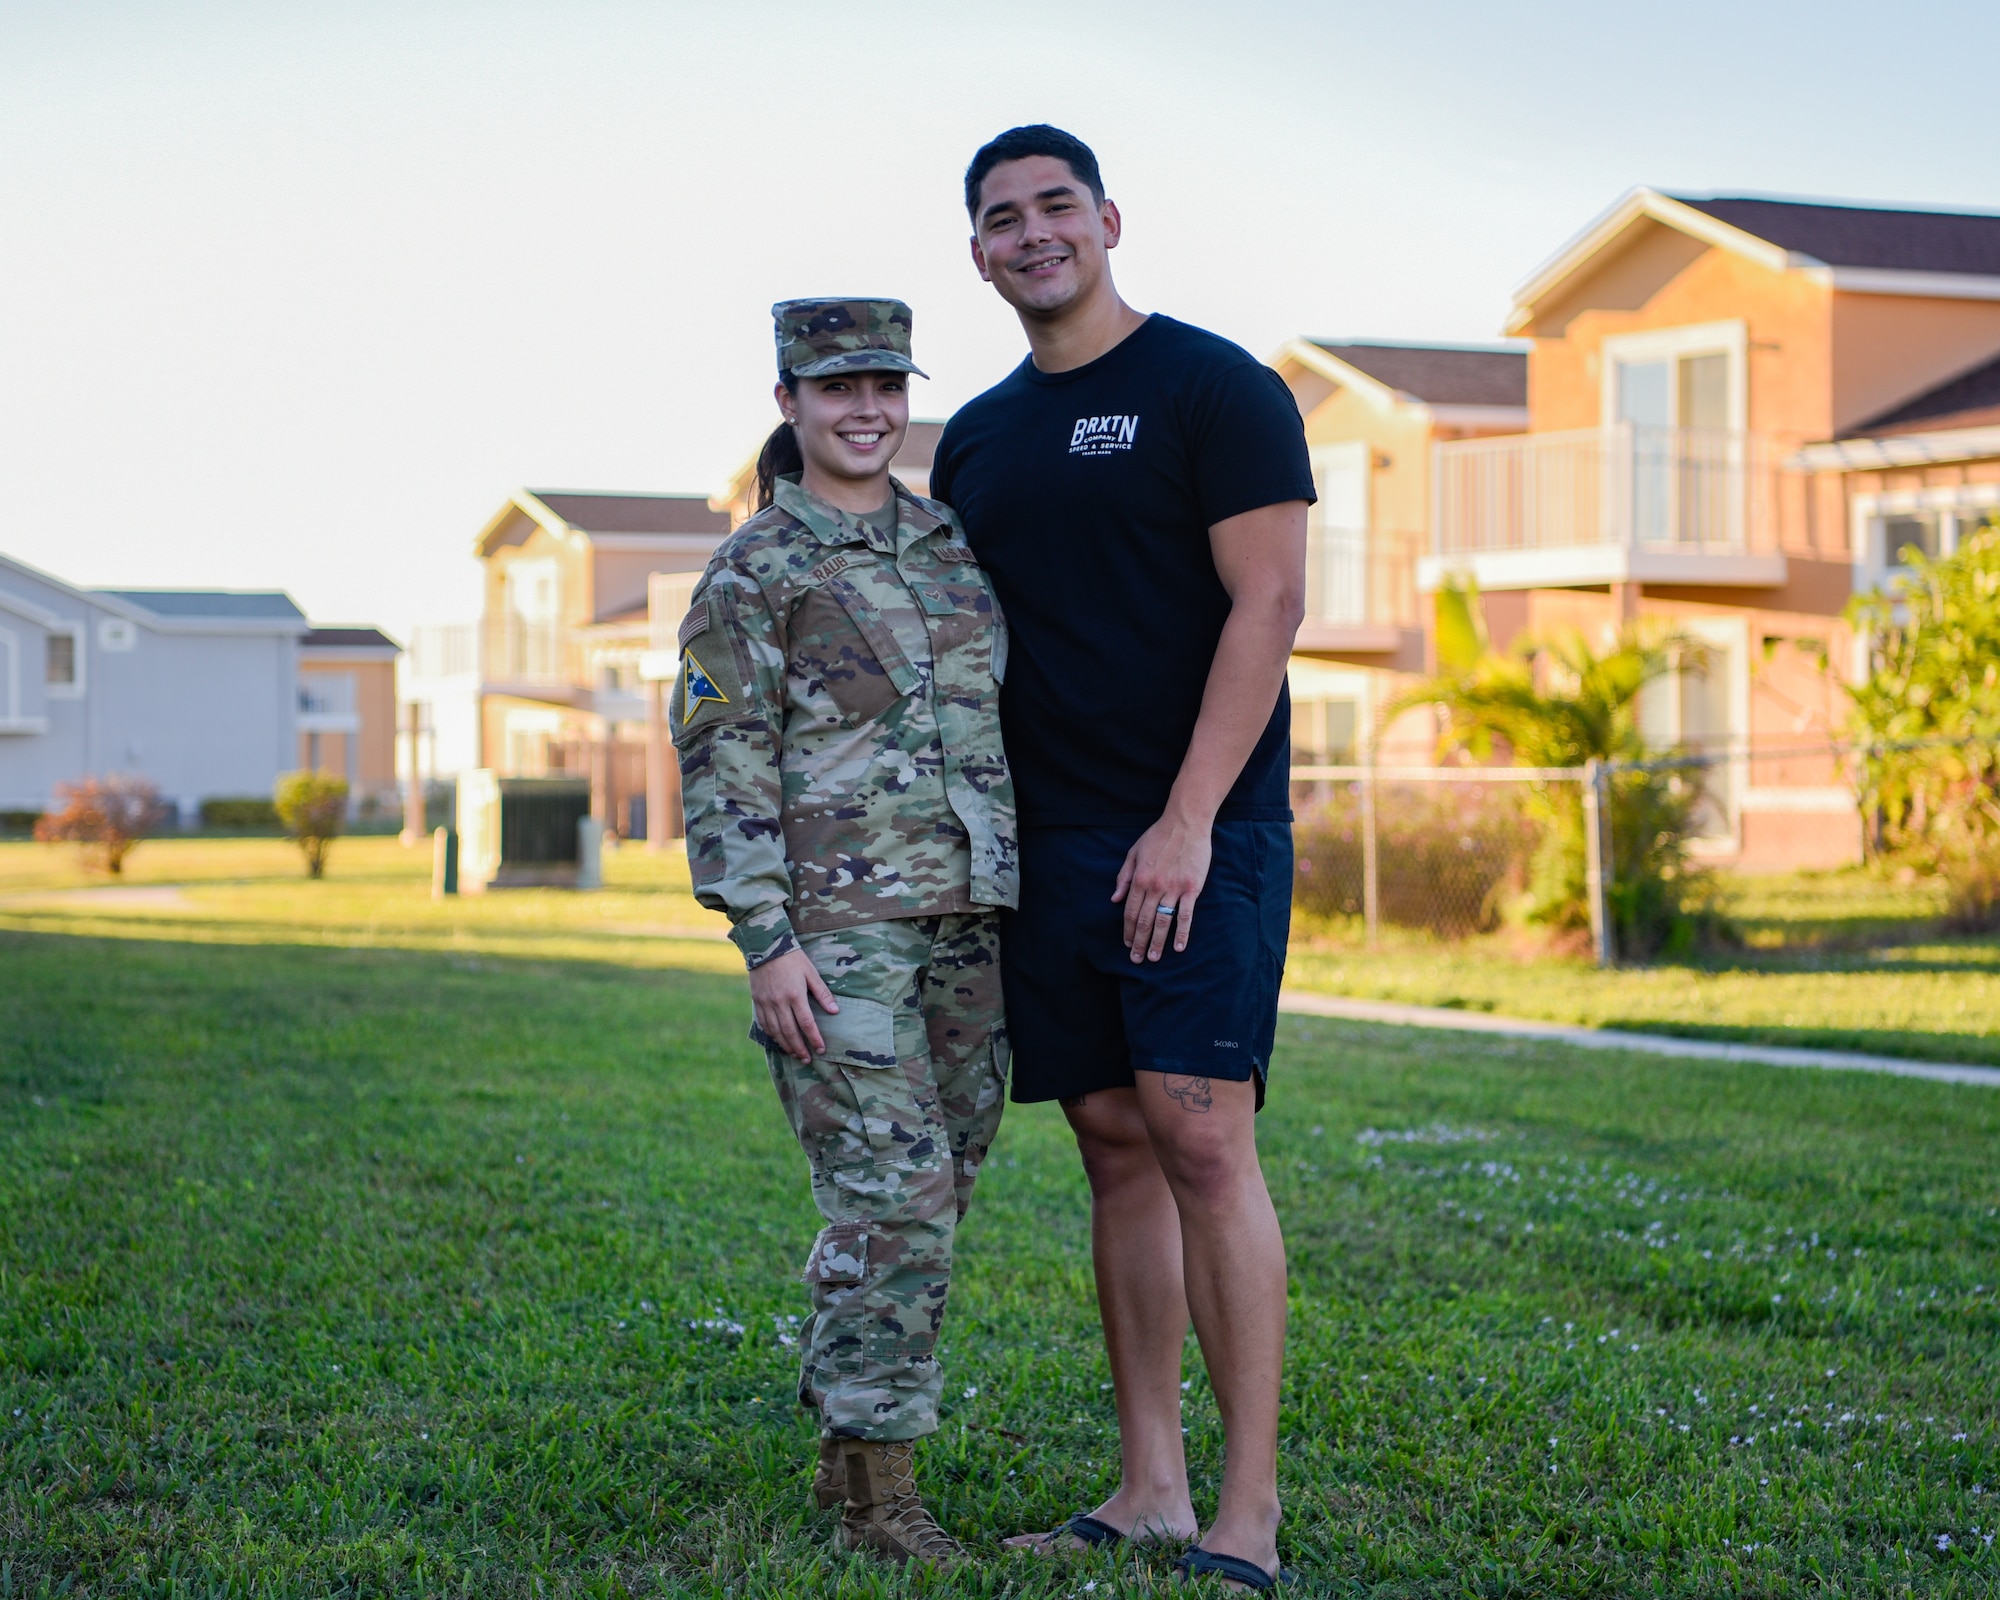 U.S. Air Force Airman 1st Class Dakota Raub and her husband, Gerardo Verdugo, stand outside their home on Patrick Space Force Base, Fla., December 2, 2021. Raub and her husband moved to Patrick SFB in March of 2021 for her first duty assignment. (U.S. Space Force photo by Airman 1st Class Thomas Sjoberg)